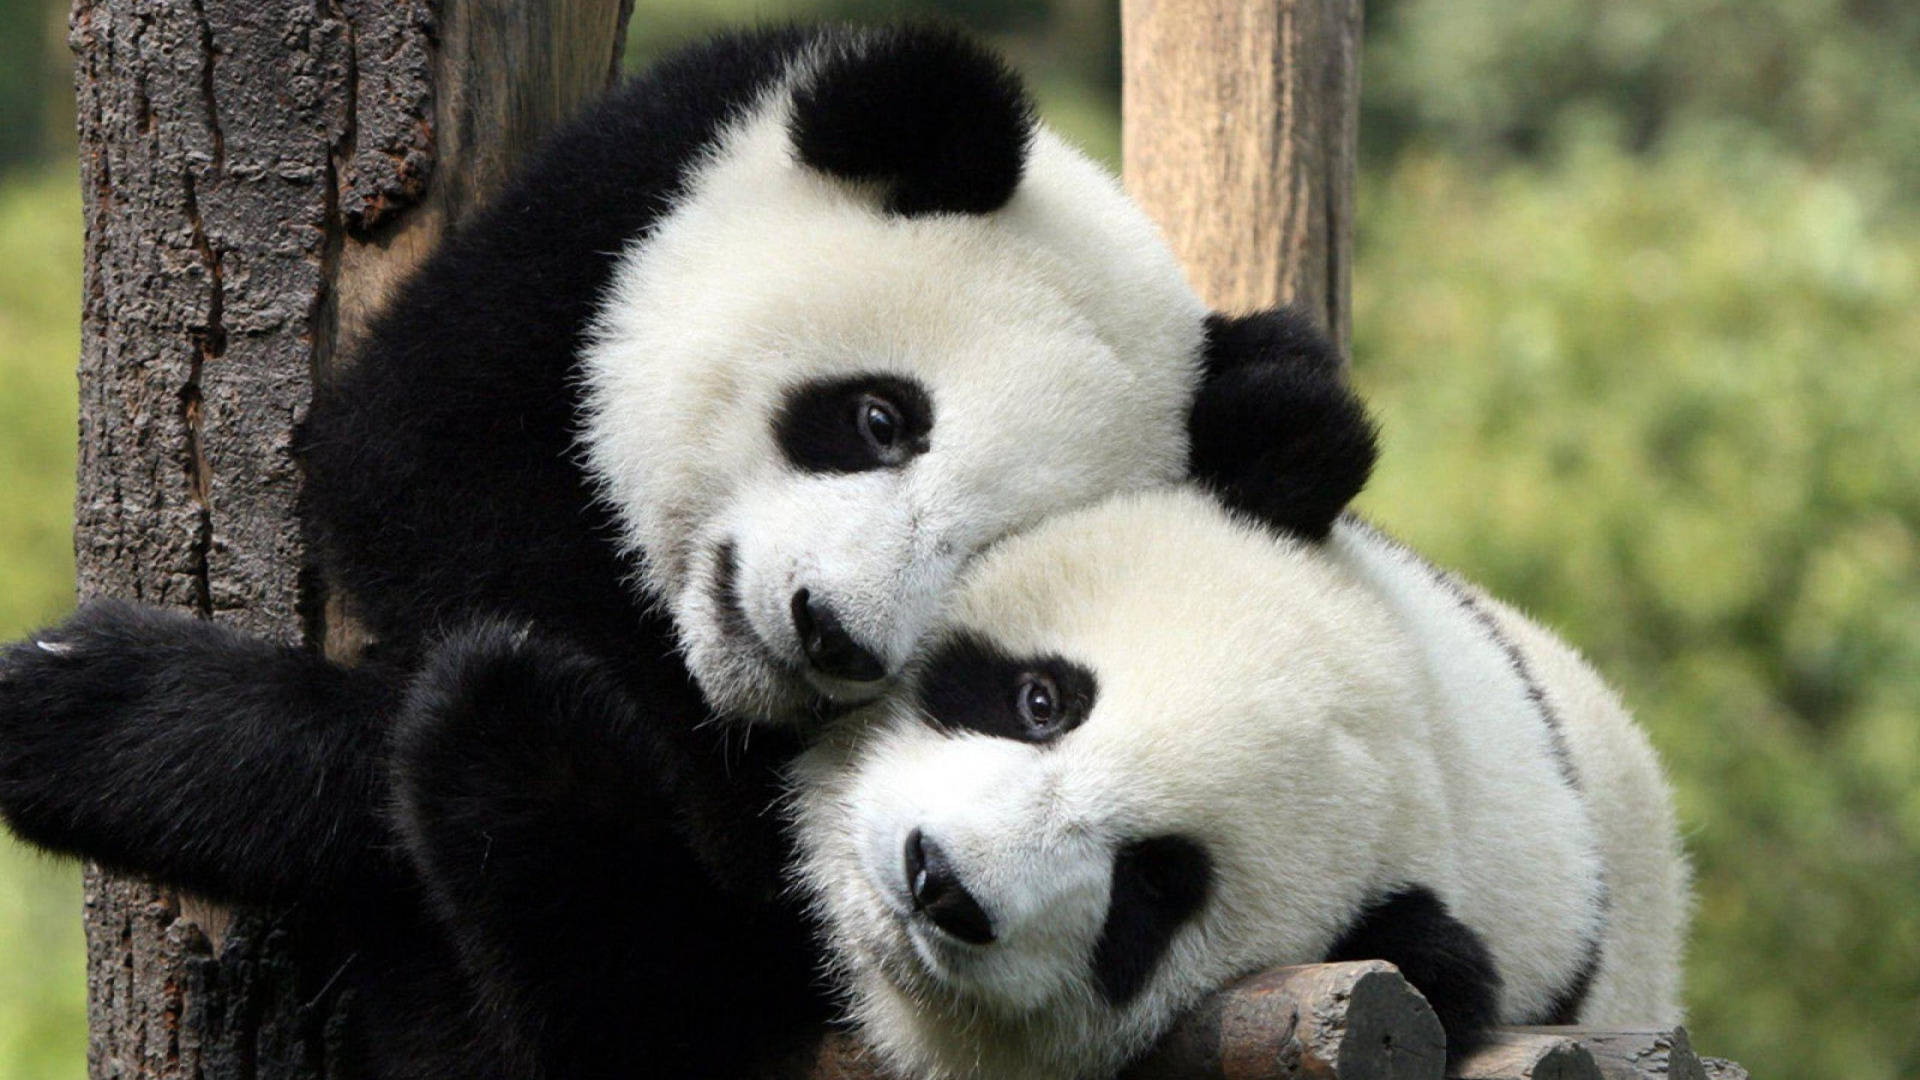 Cool Cute Pandas Hugging Each Other Background